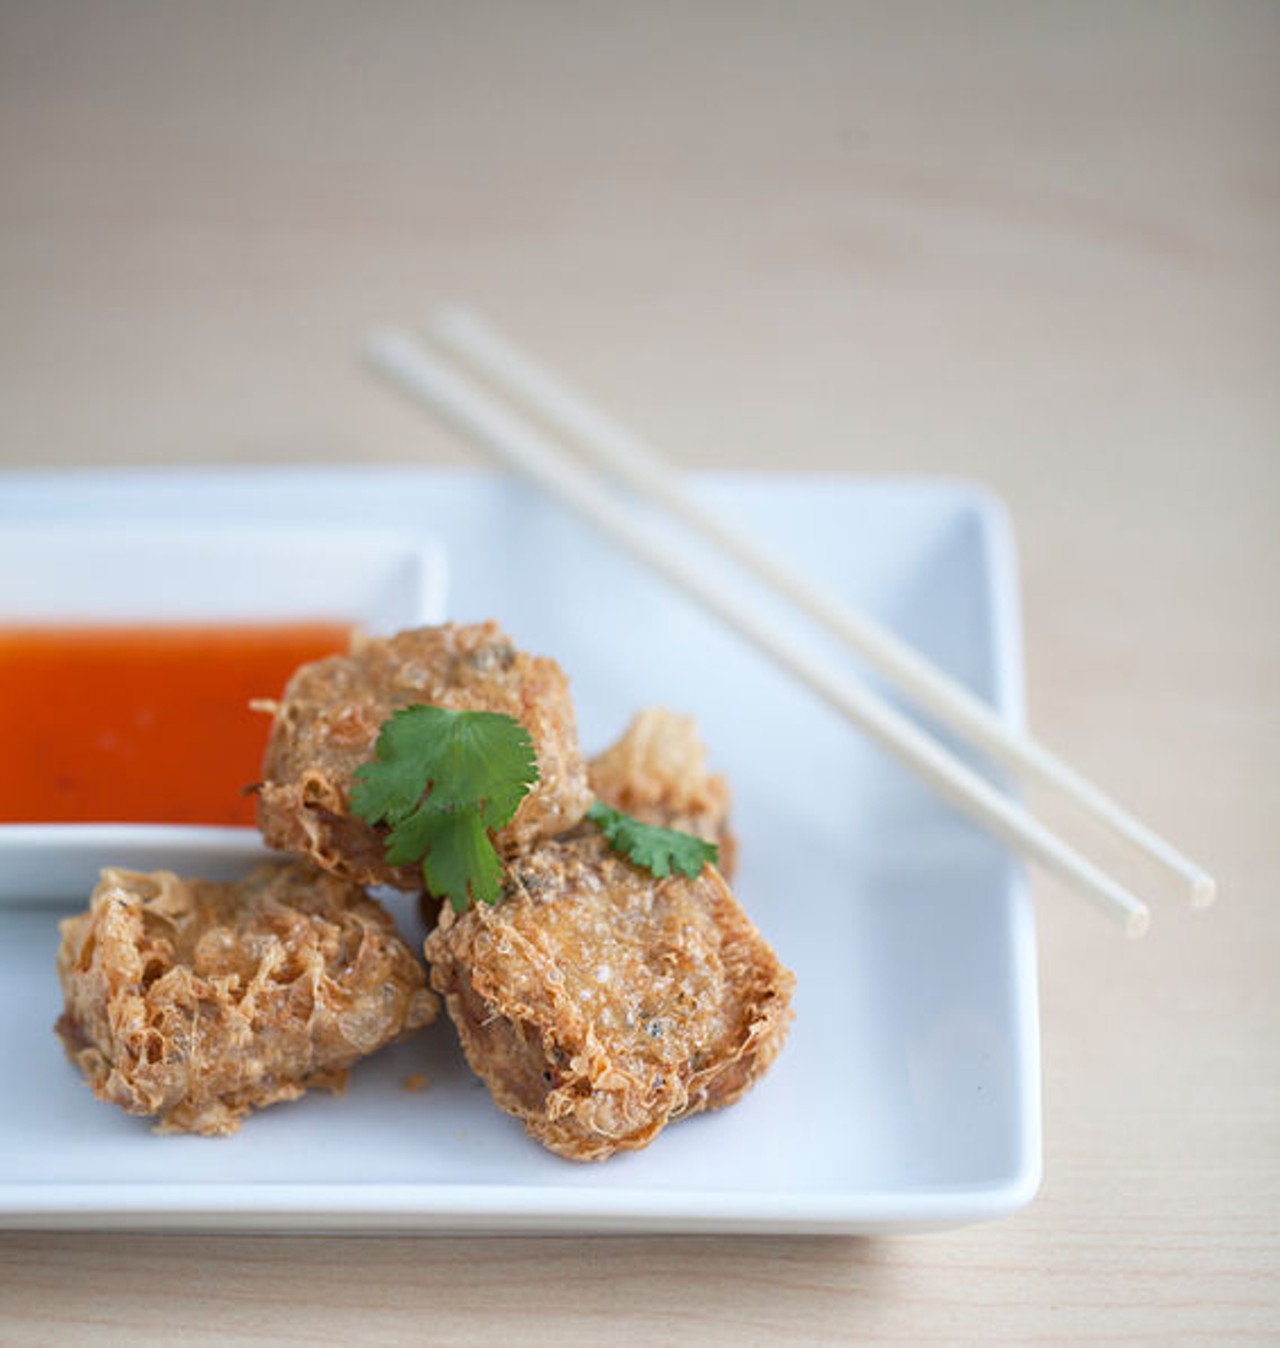 From the appetizer menu, Hoy Jaw. Deep-fried dumplings with crab and shrimp mixed with minced pork, wrapped in tofu skin, and served with a Thai sweet chili sauce. See more photos: Inside Fork & Stix in the Delmar Loop area.